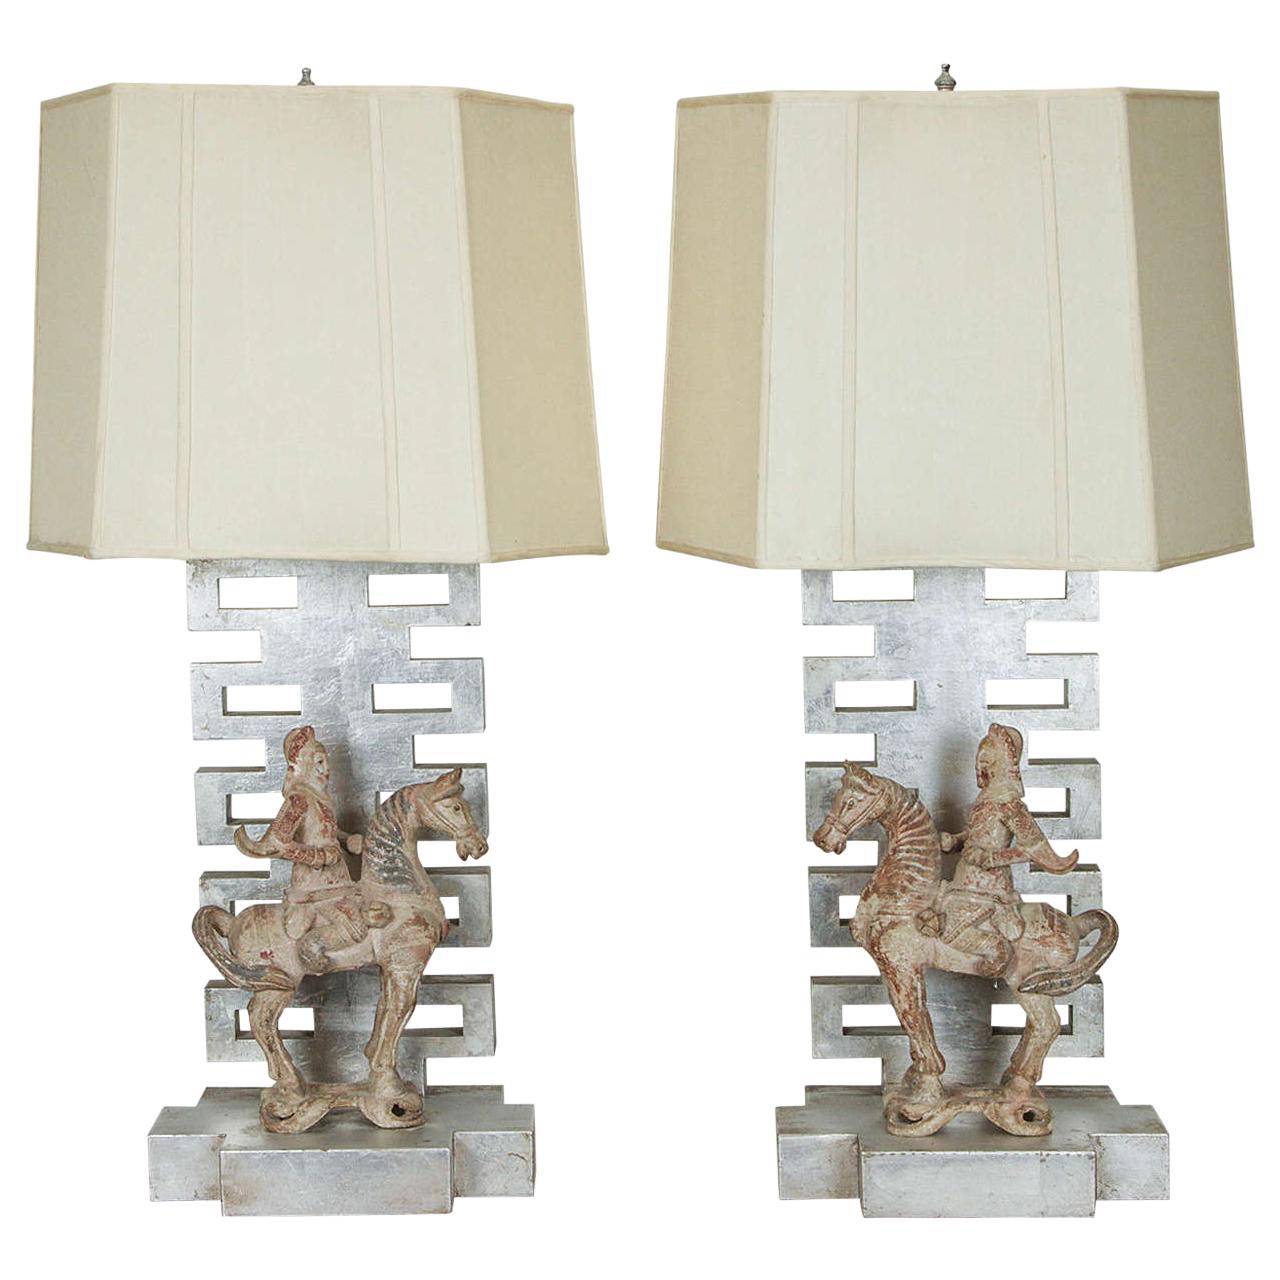 Rare Pair of Lamps by James Mont with Chinese Warrior Figures